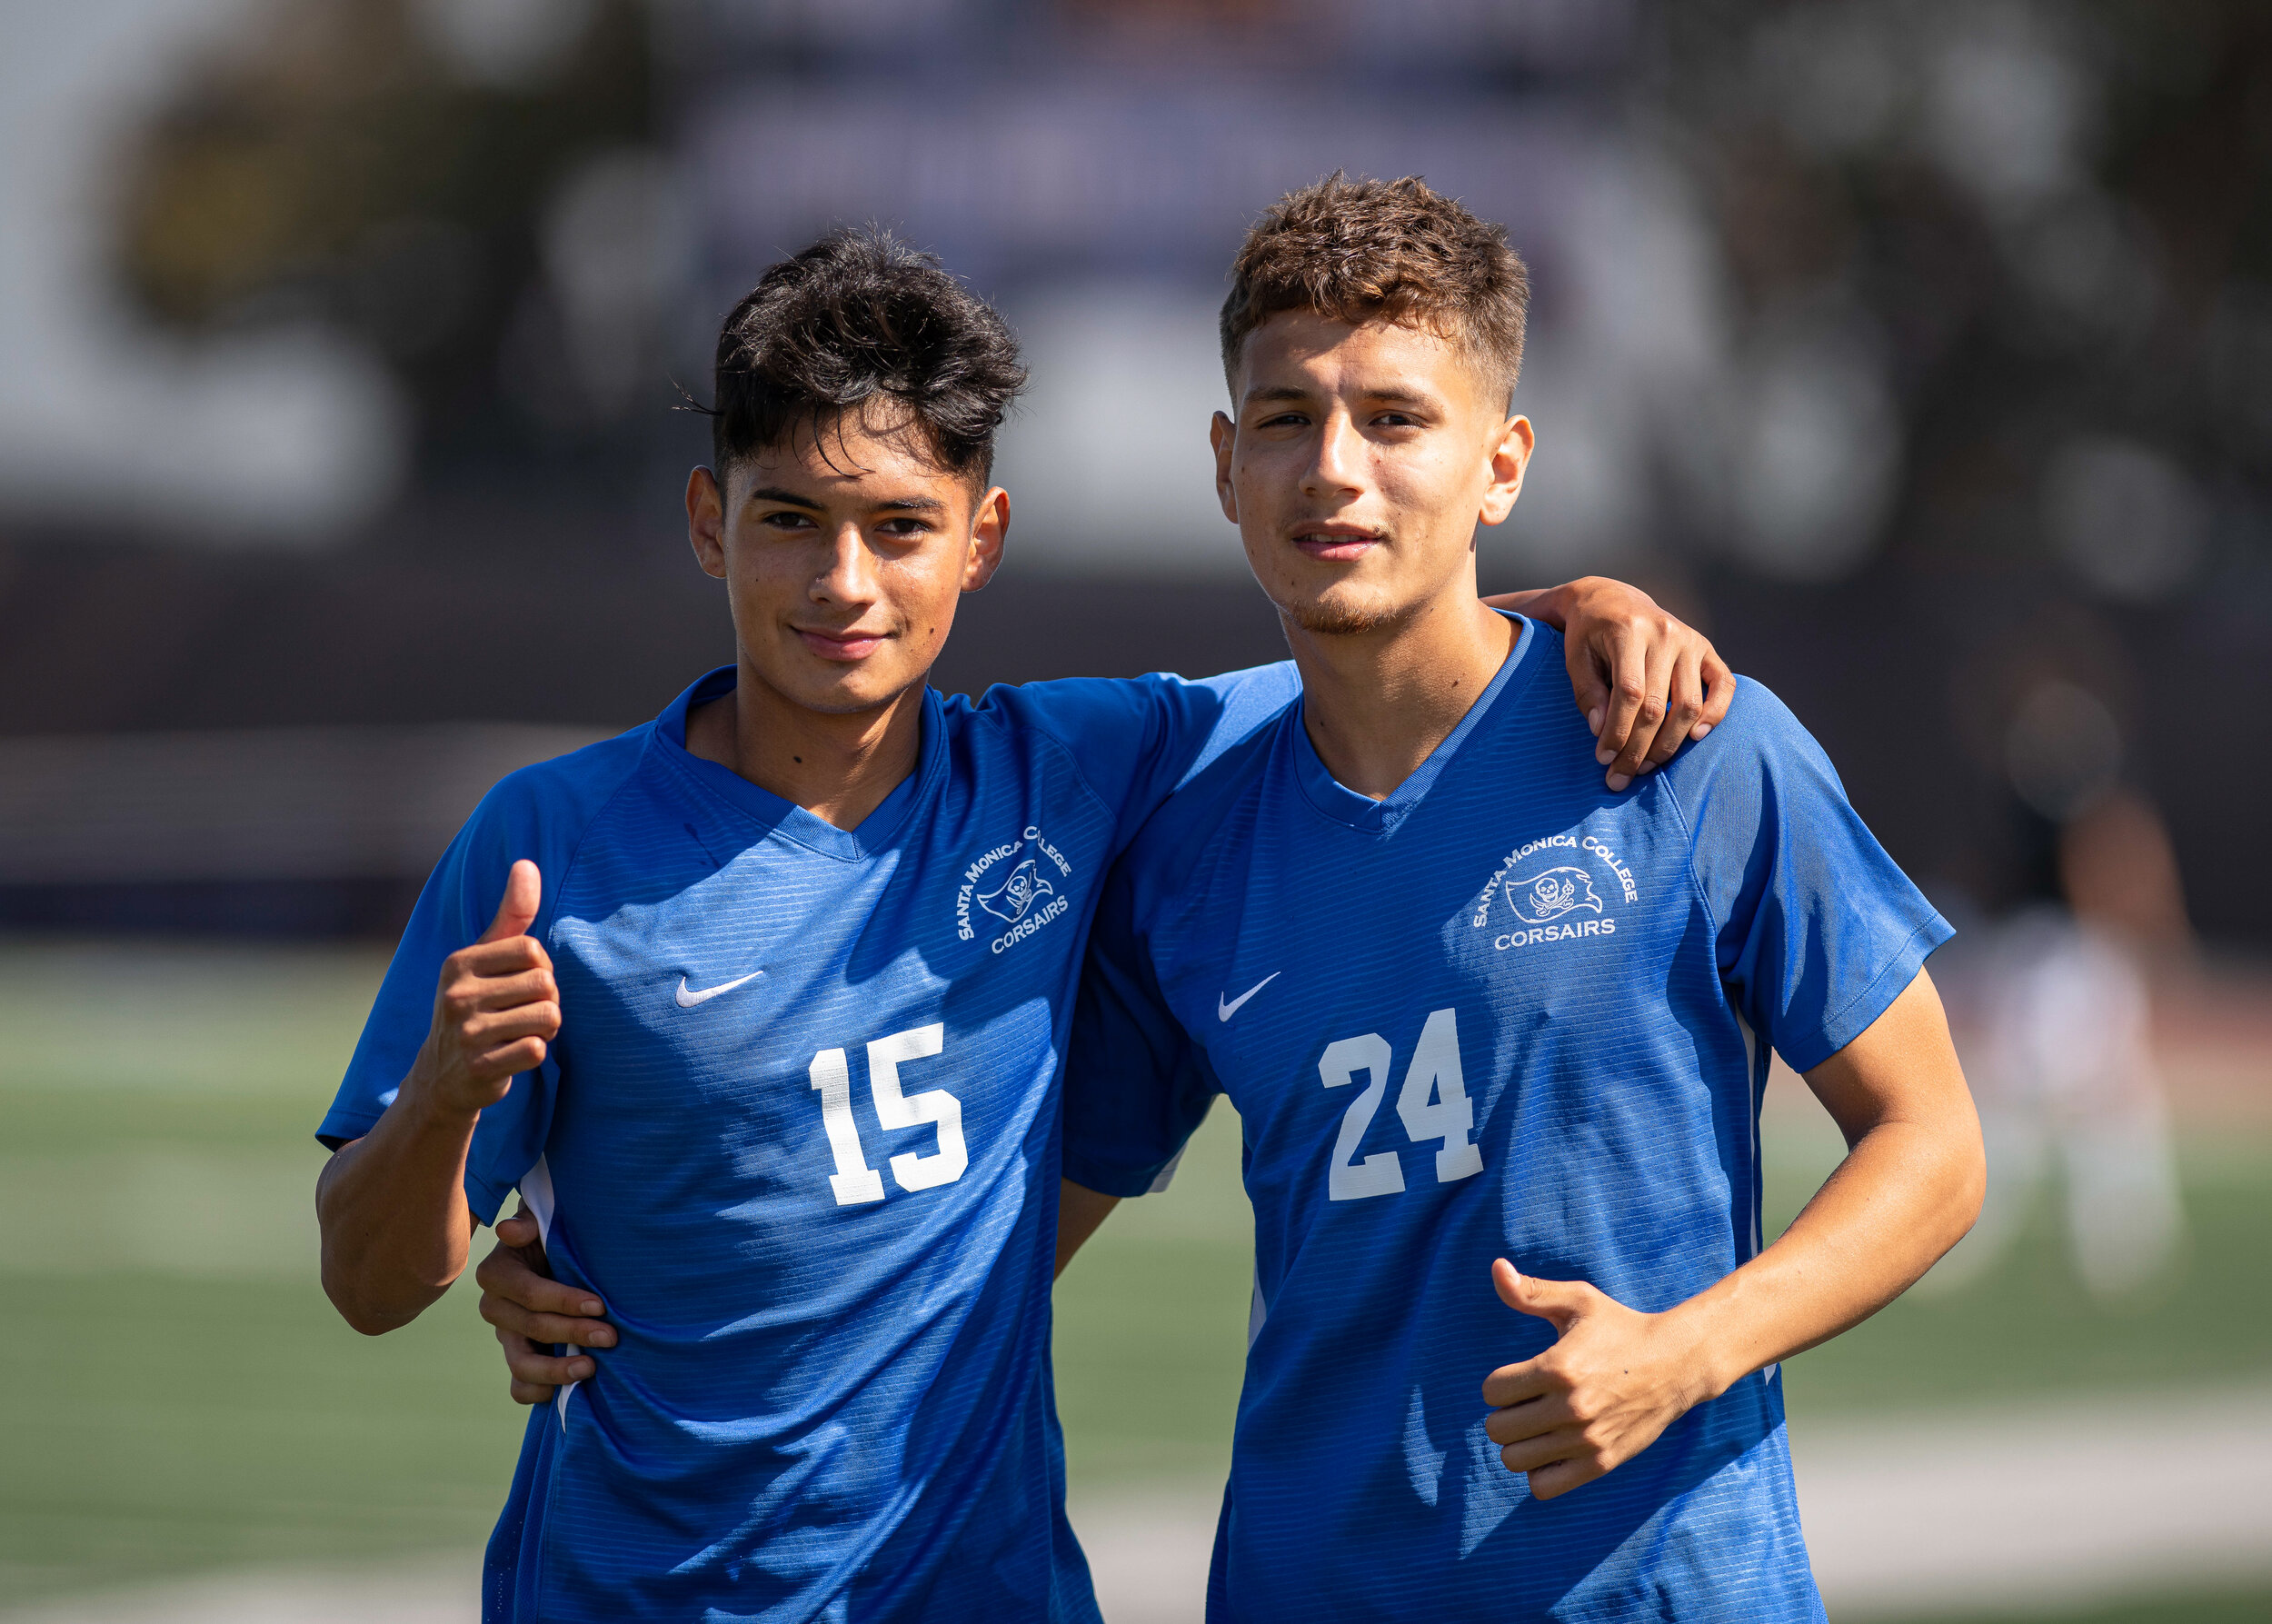  Santa Monica College players, Isaac Gonzalez (15), (L-R) and Rogelio Cruz (24) stand for a pic pre-game on September 14, 2021, at Santa Monica College in Santa Monica, Calif. (Jon Putman | The Corsair) 